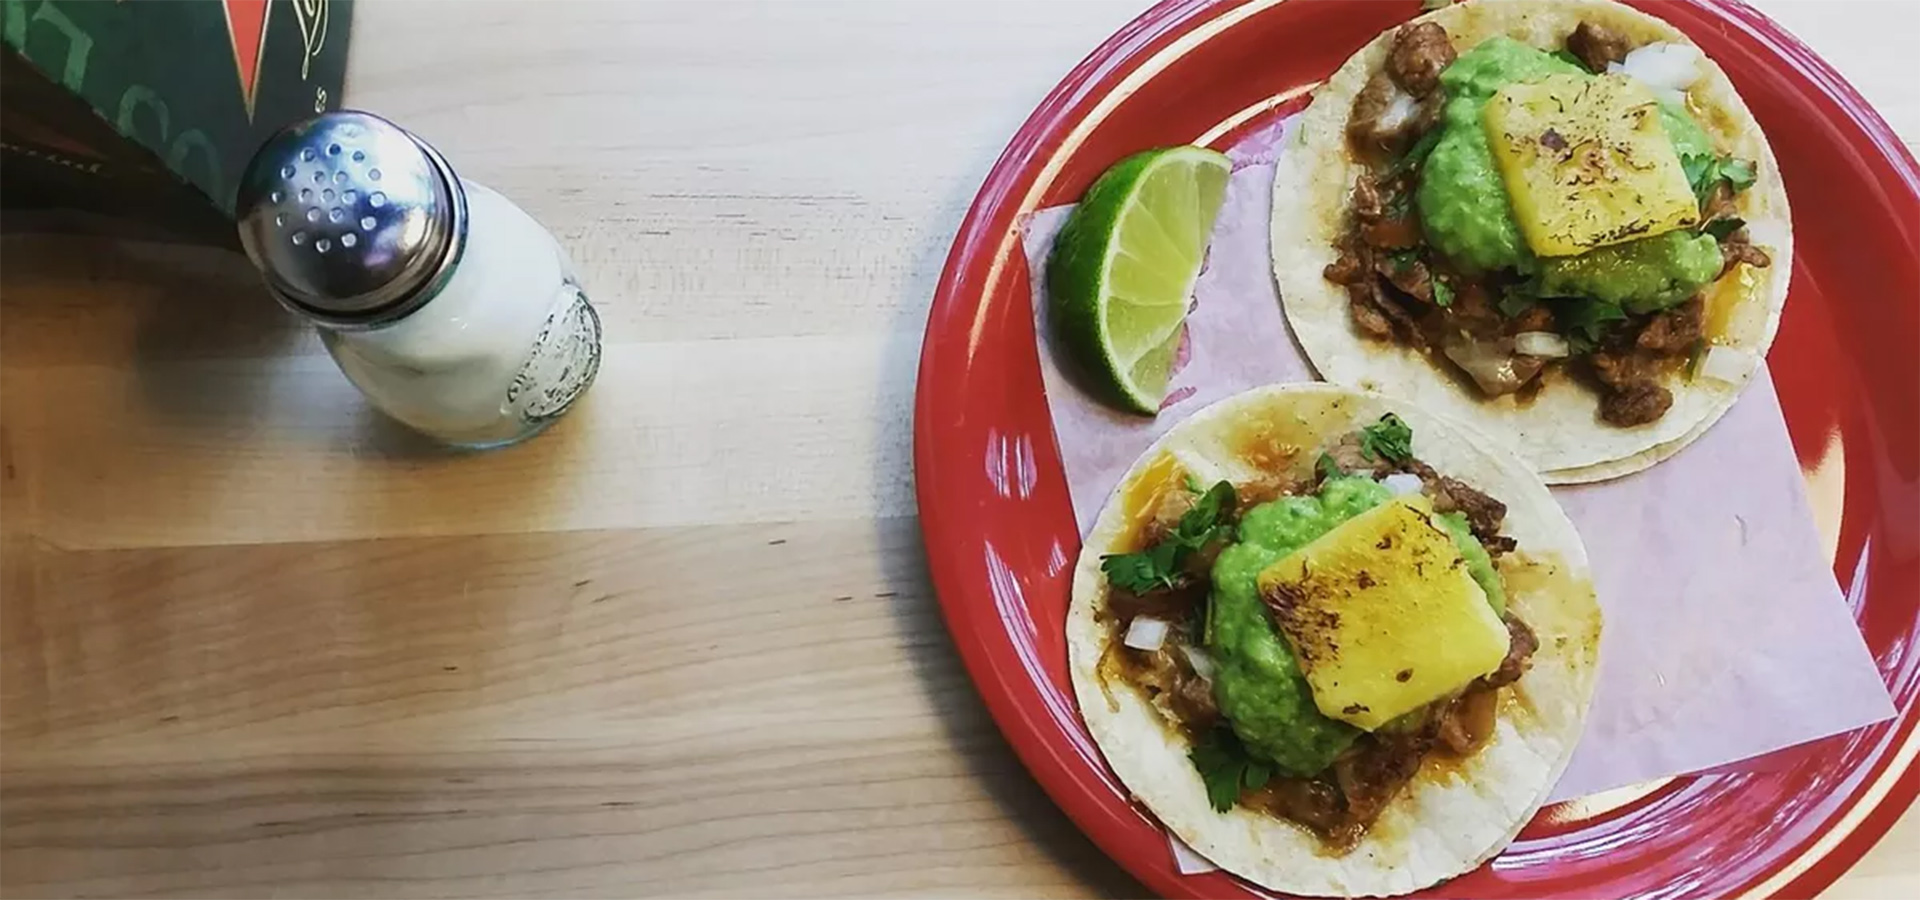 Image of Tacos